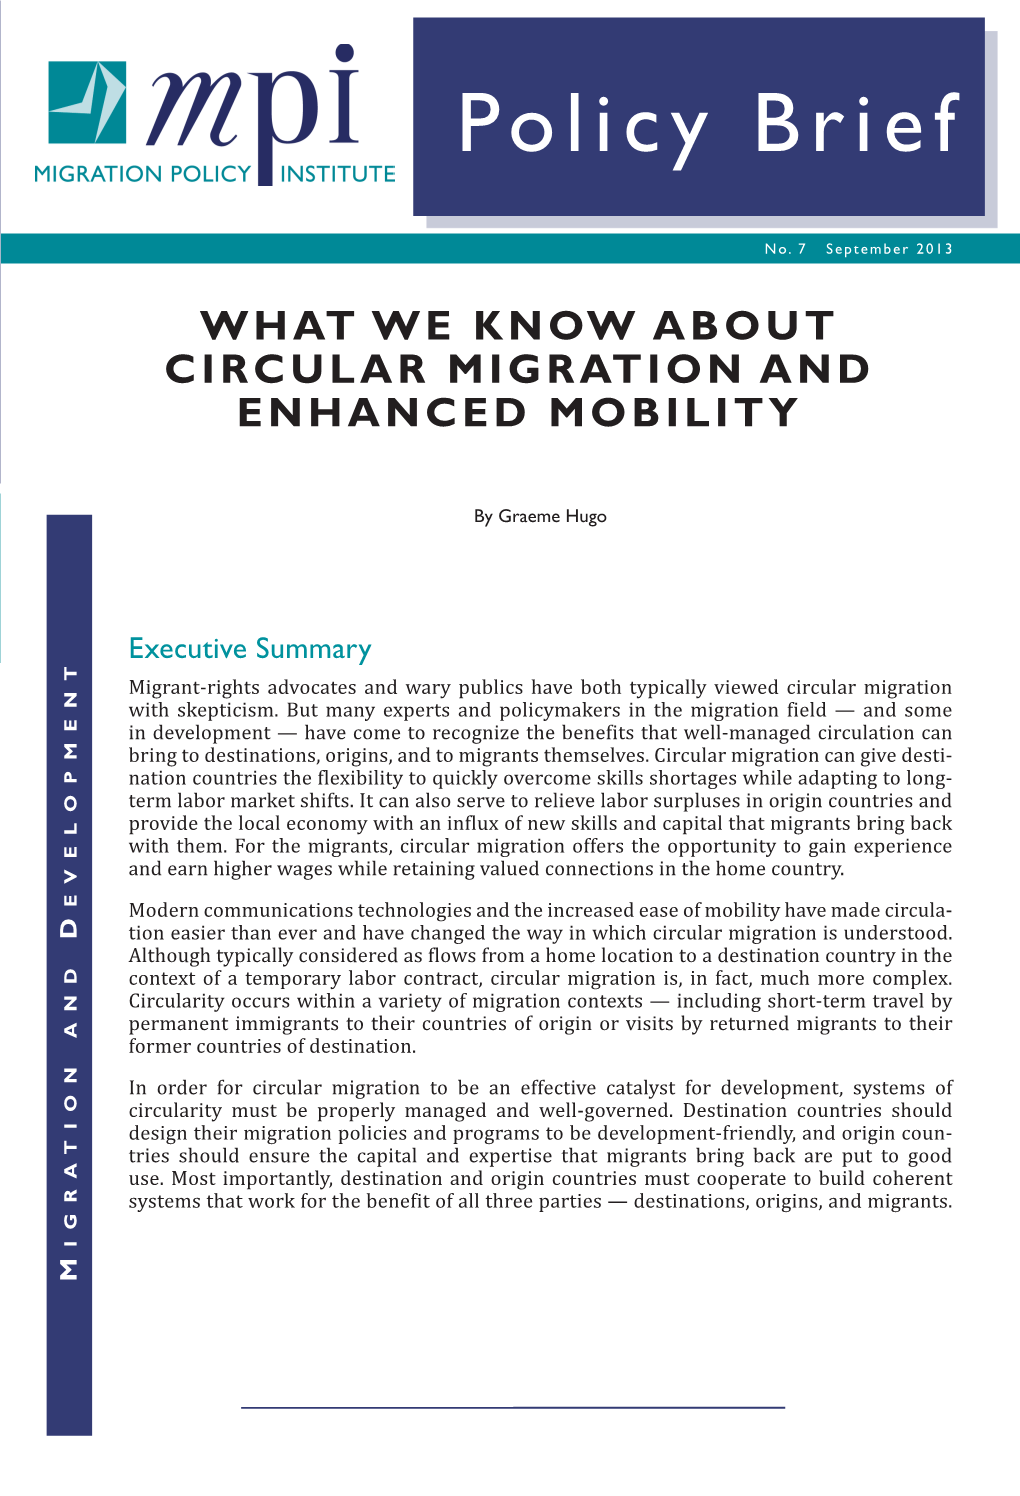 What We Know About Circular Migration and Enhanced Mobility